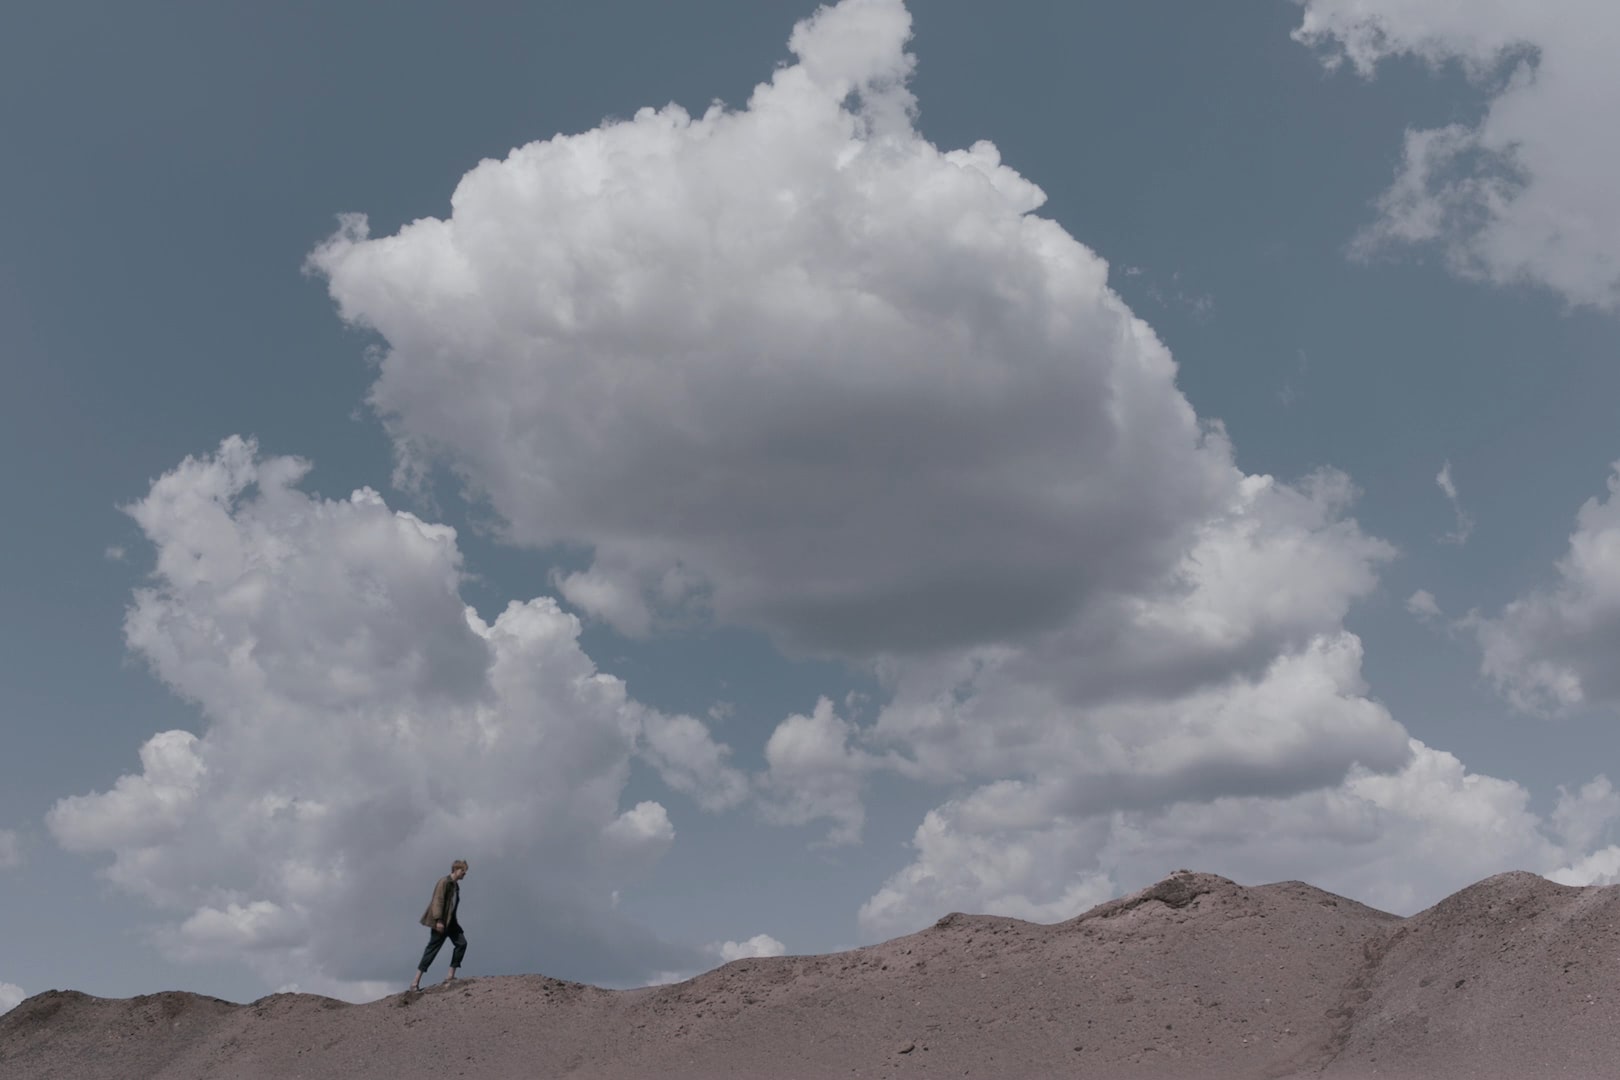 Man walking on a sand dune against the horizon beneath giant white clouds.